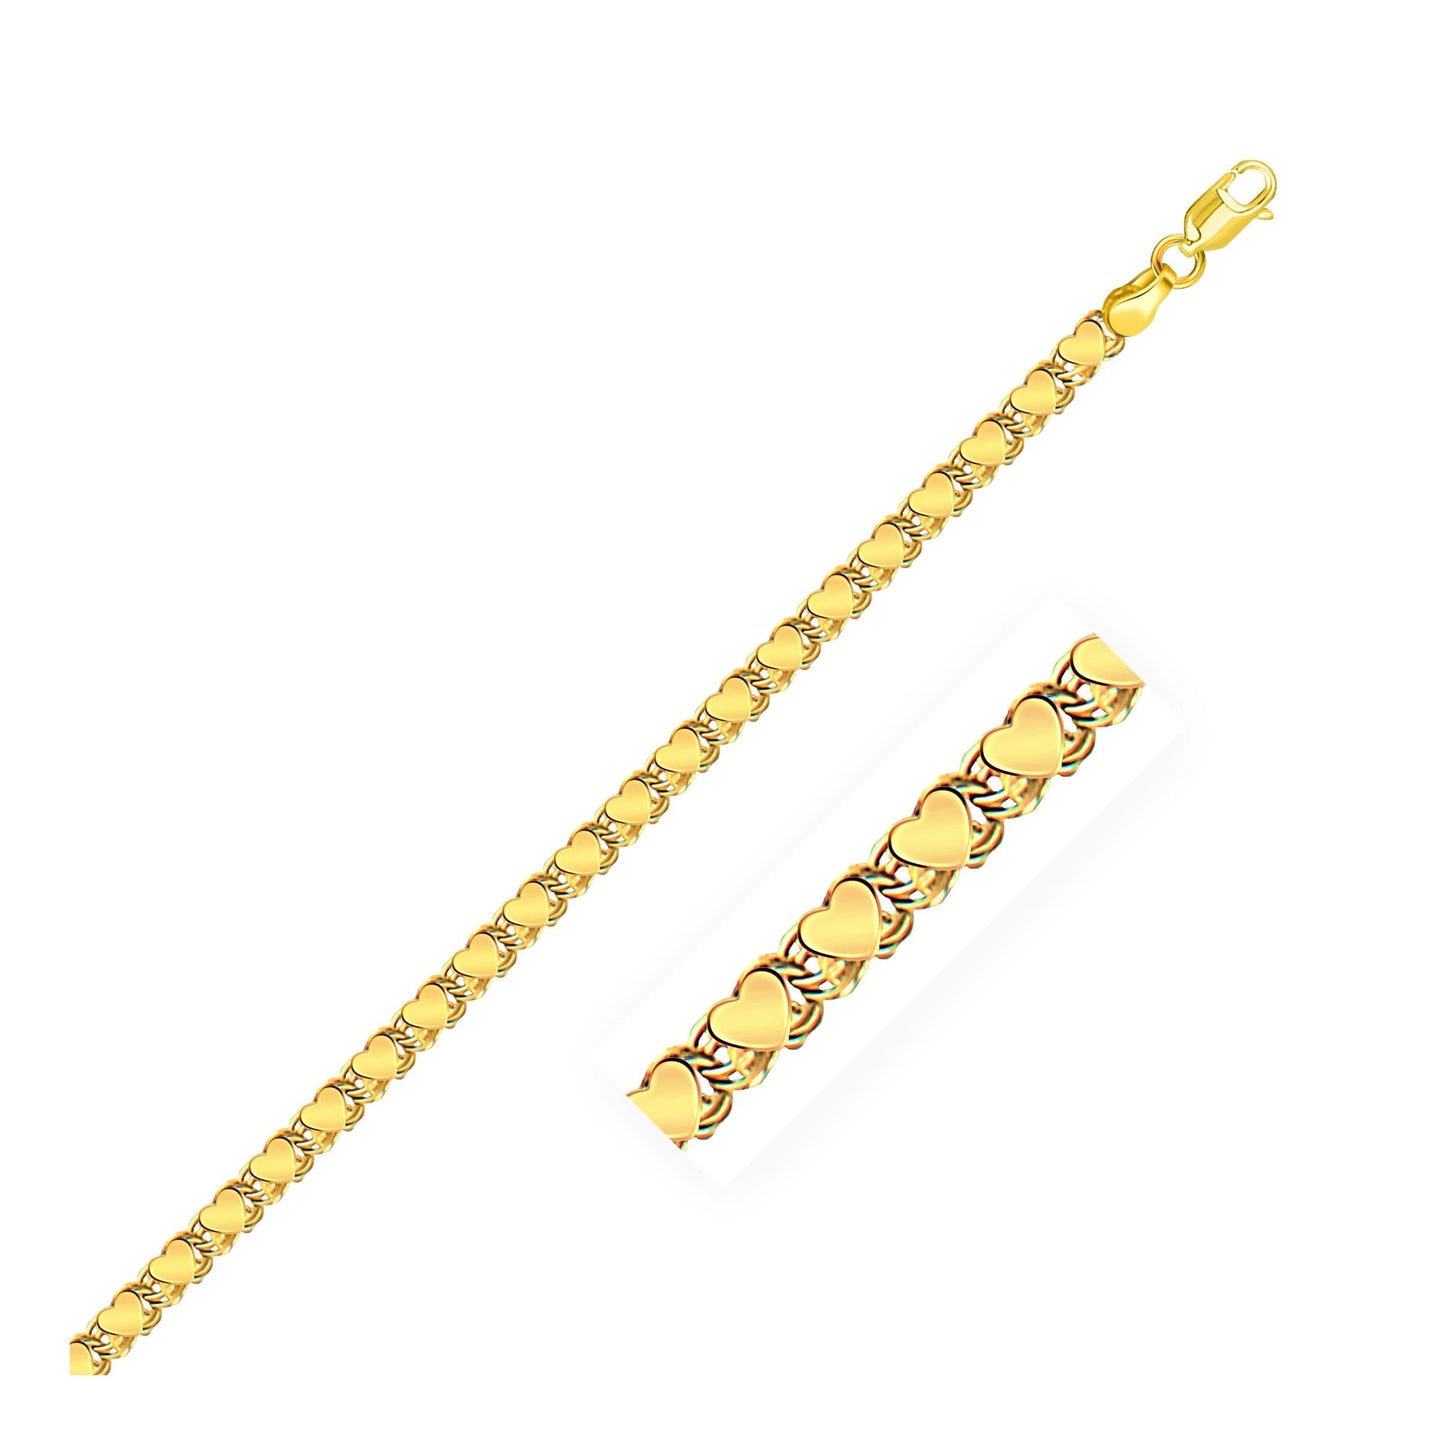 Heart Chain Necklace in 14k Yellow Gold